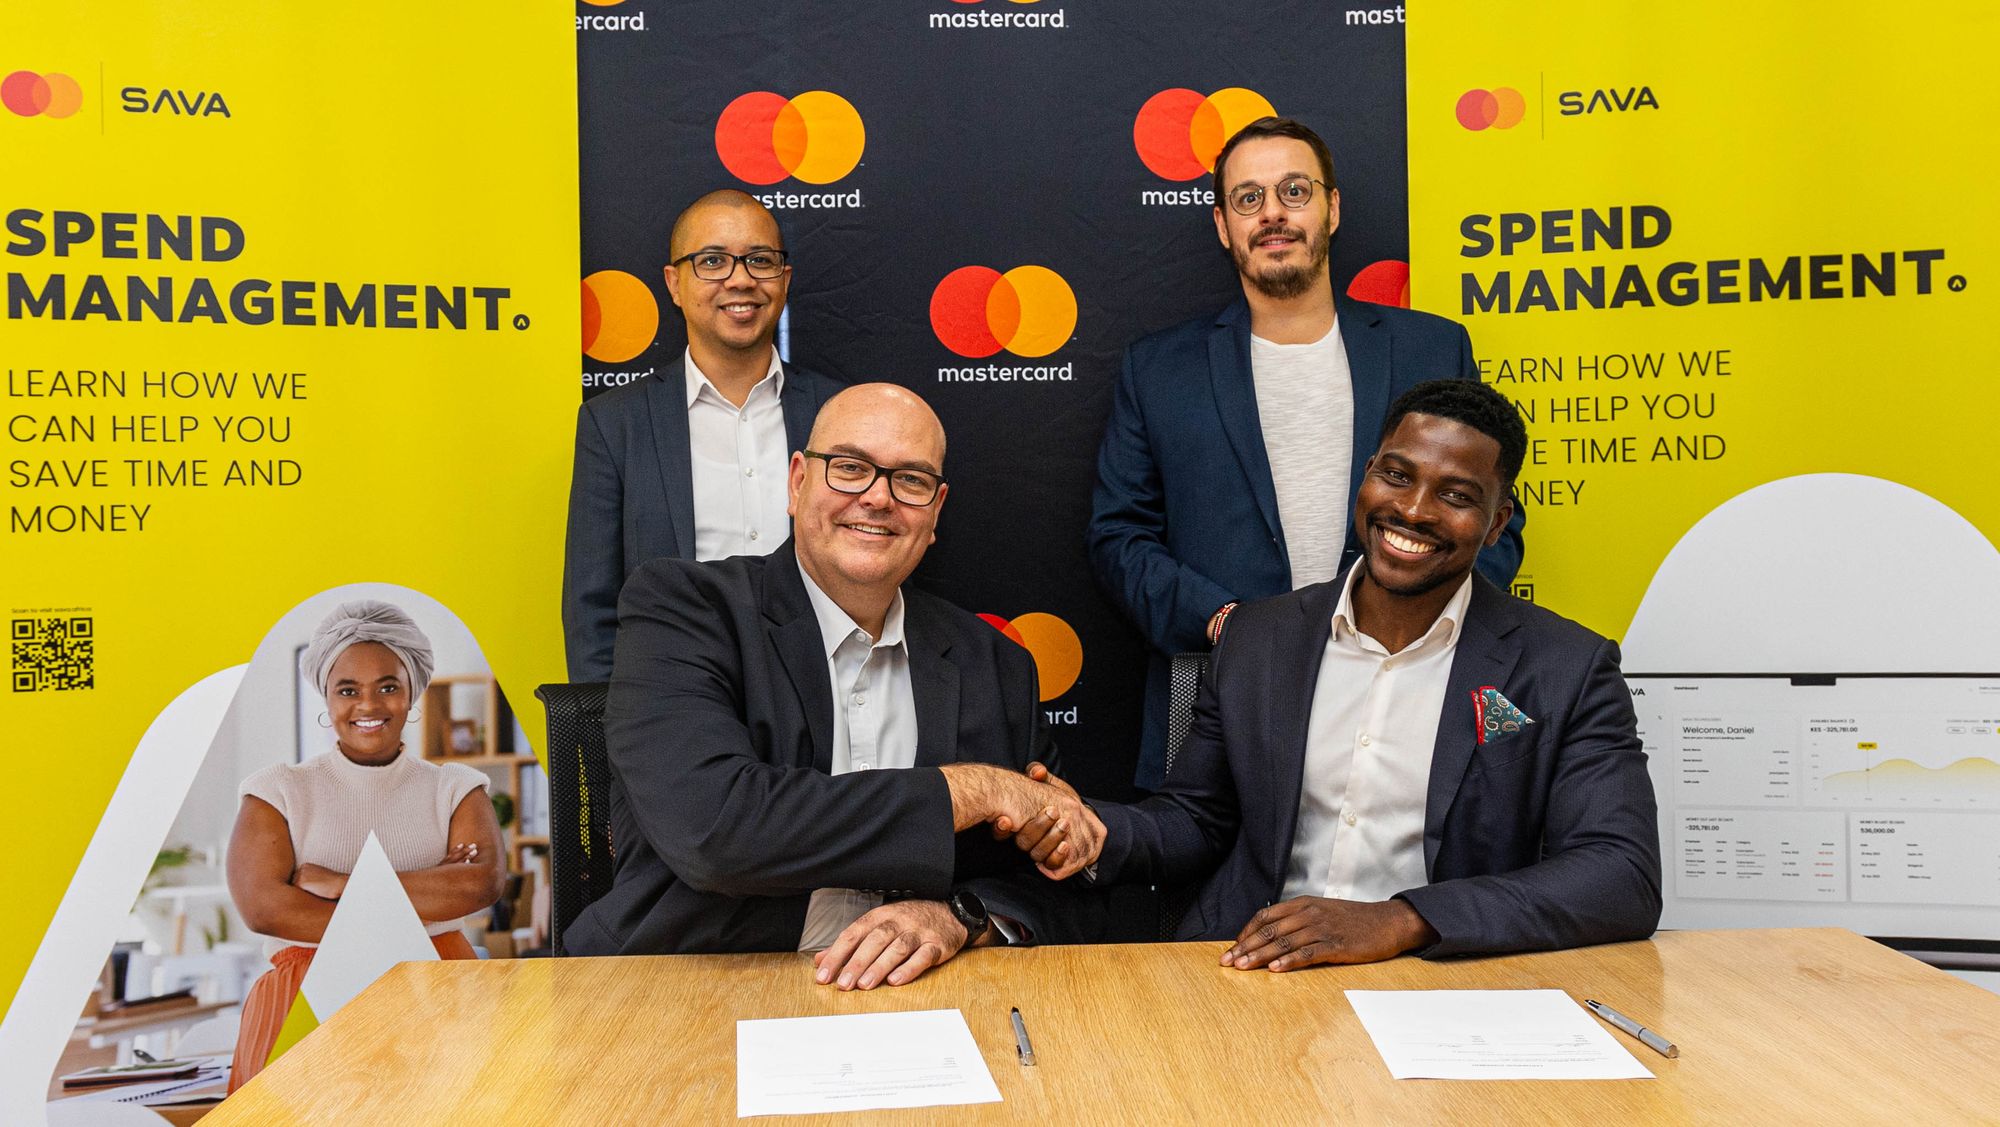 Mastercard and SAVA Partner to Empower SMMEs Across Africa with Innovative Payment Solutions